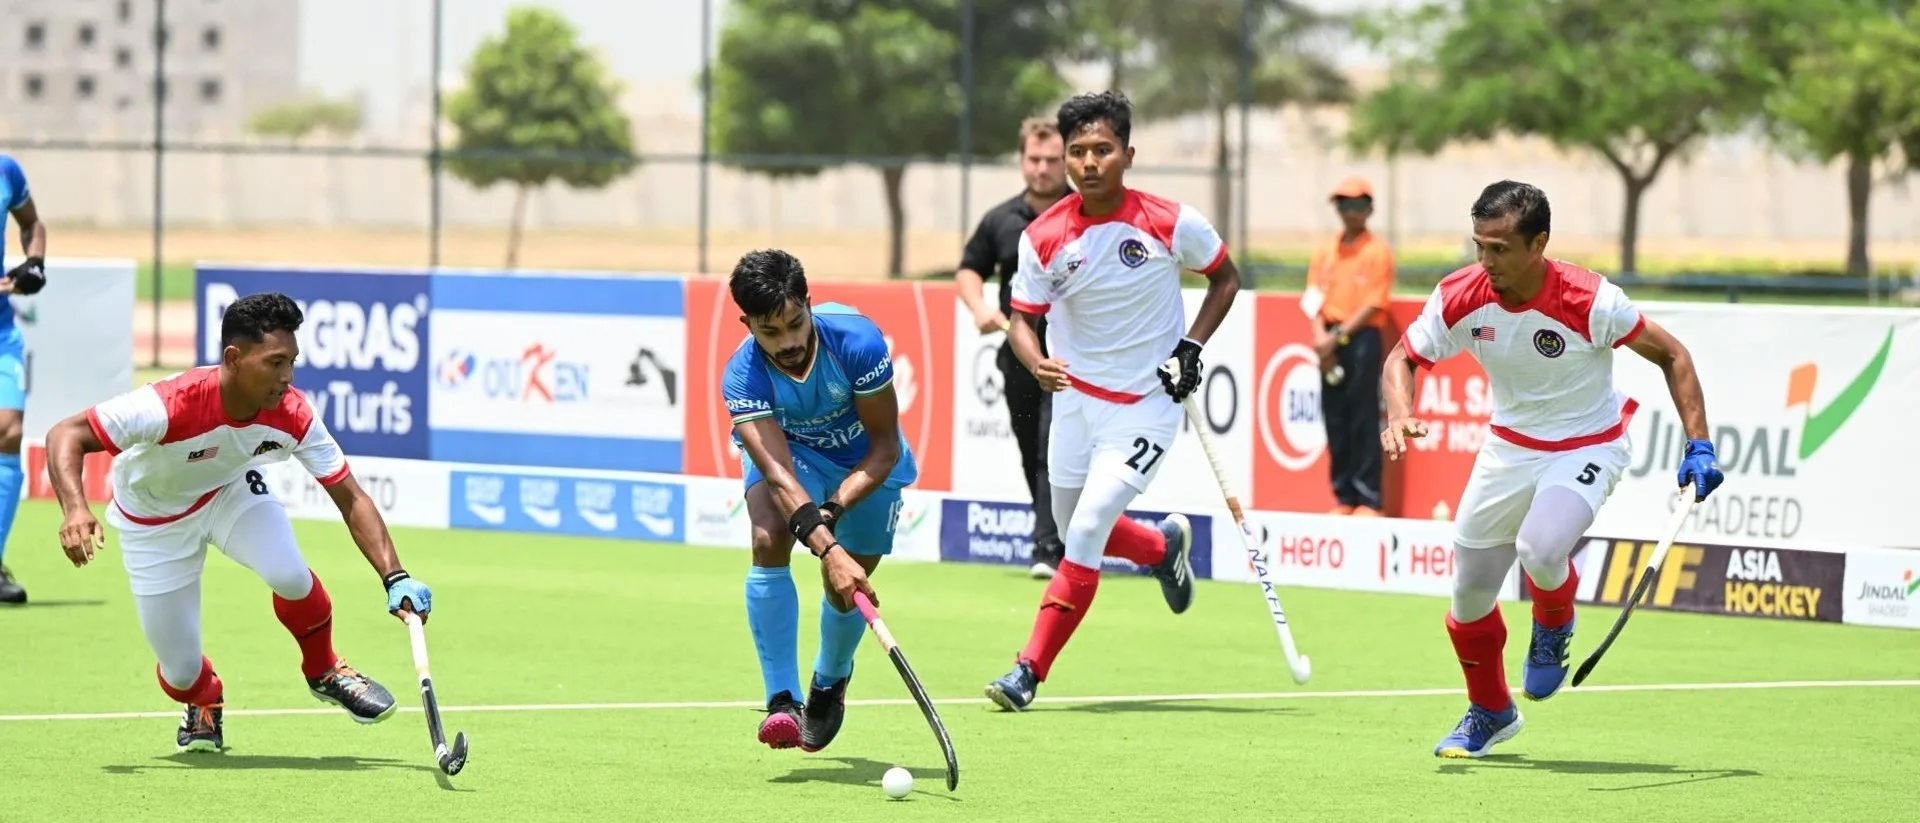 India beat Japan 35-1 in high-scoring encounter, beat Malaysia 7-5 in first game of the day